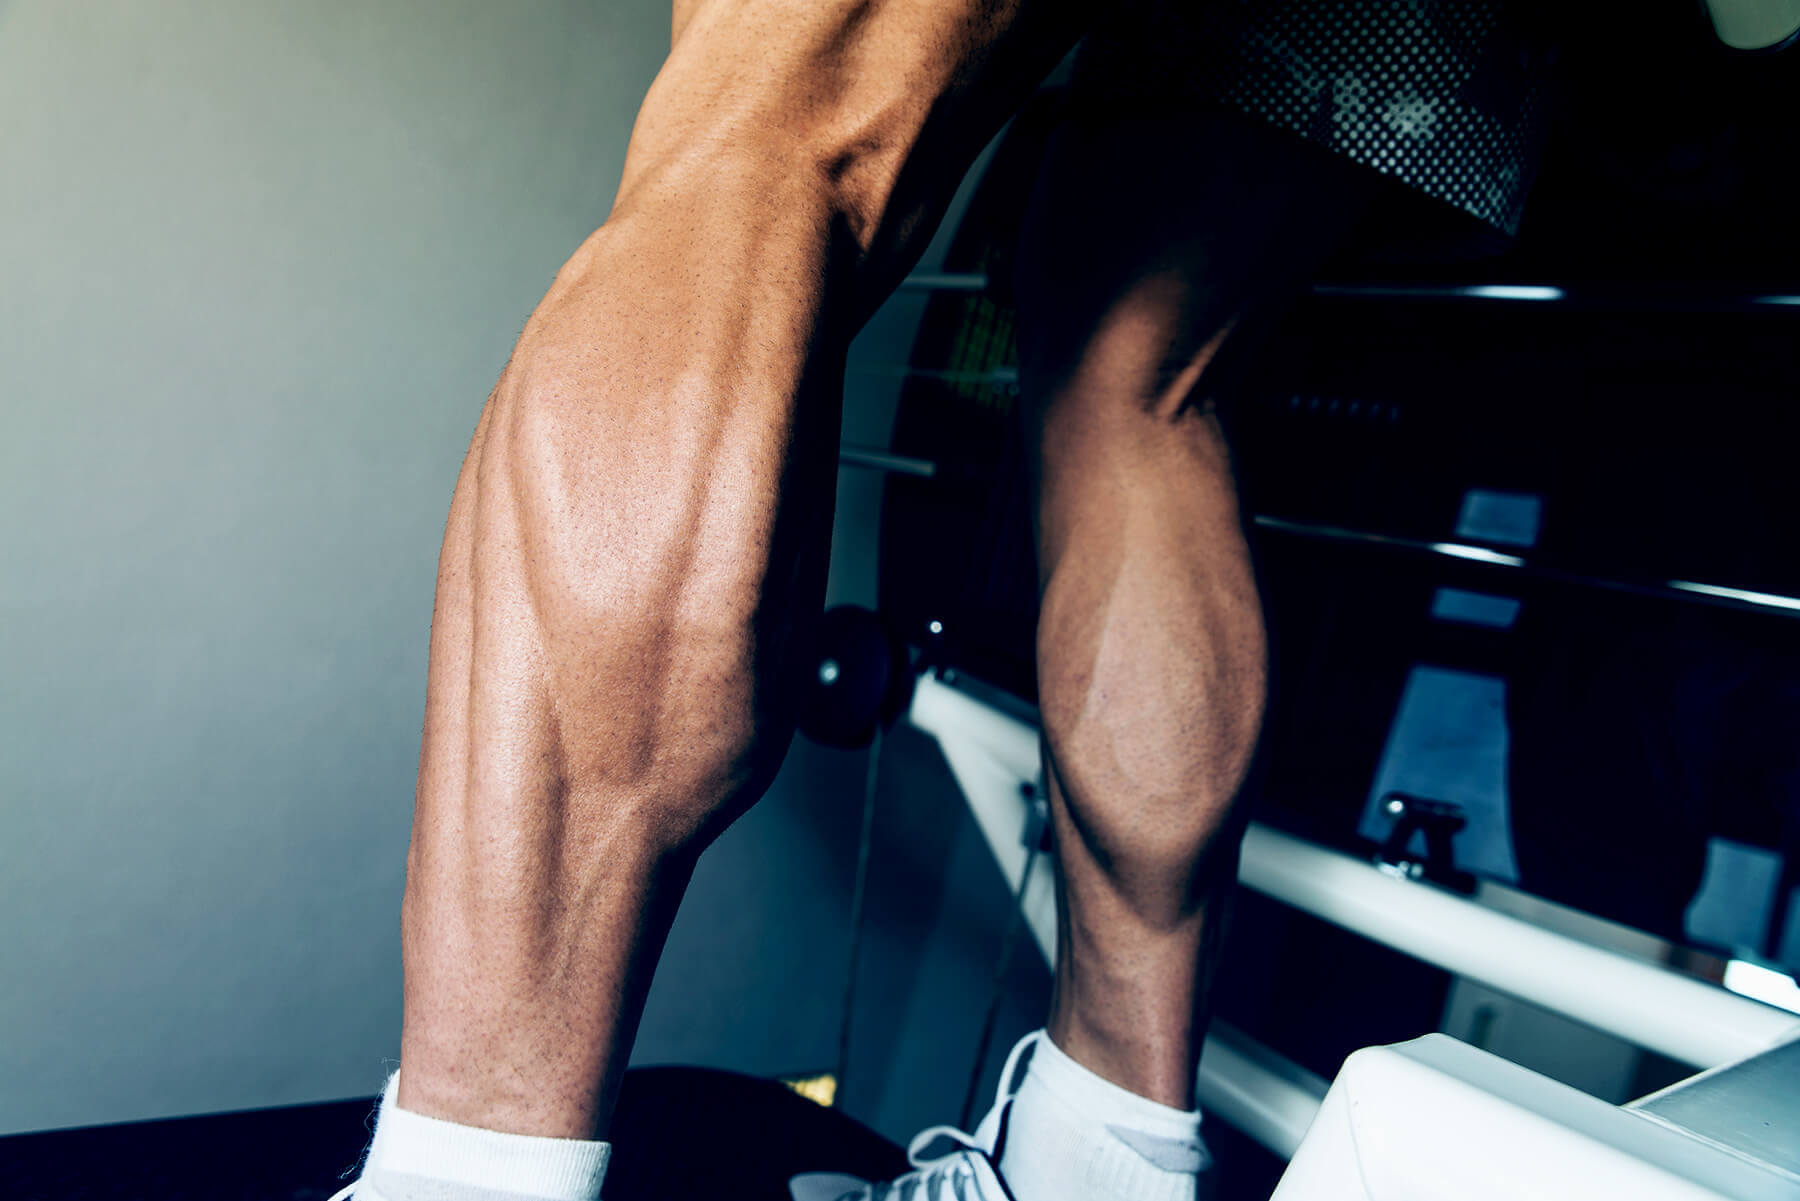 REPS: How Does Toe Position Influence Calf Growth?